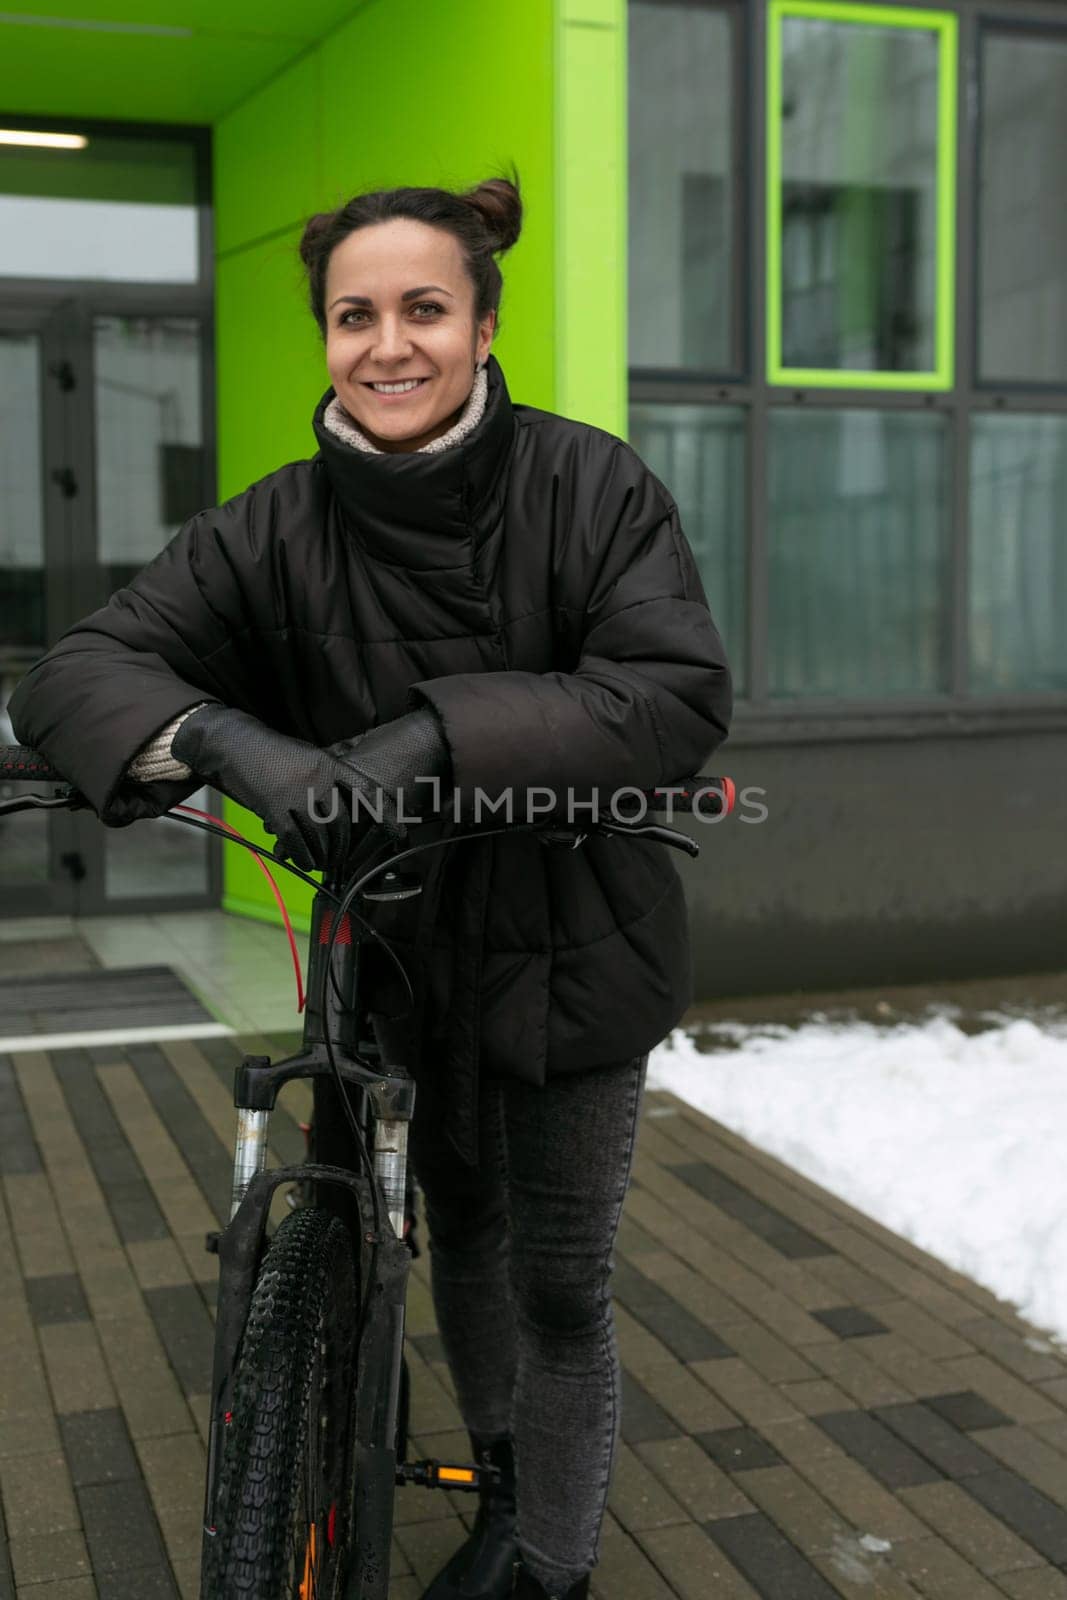 A pretty woman dressed in a black jacket went out for a walk and rented a bicycle.